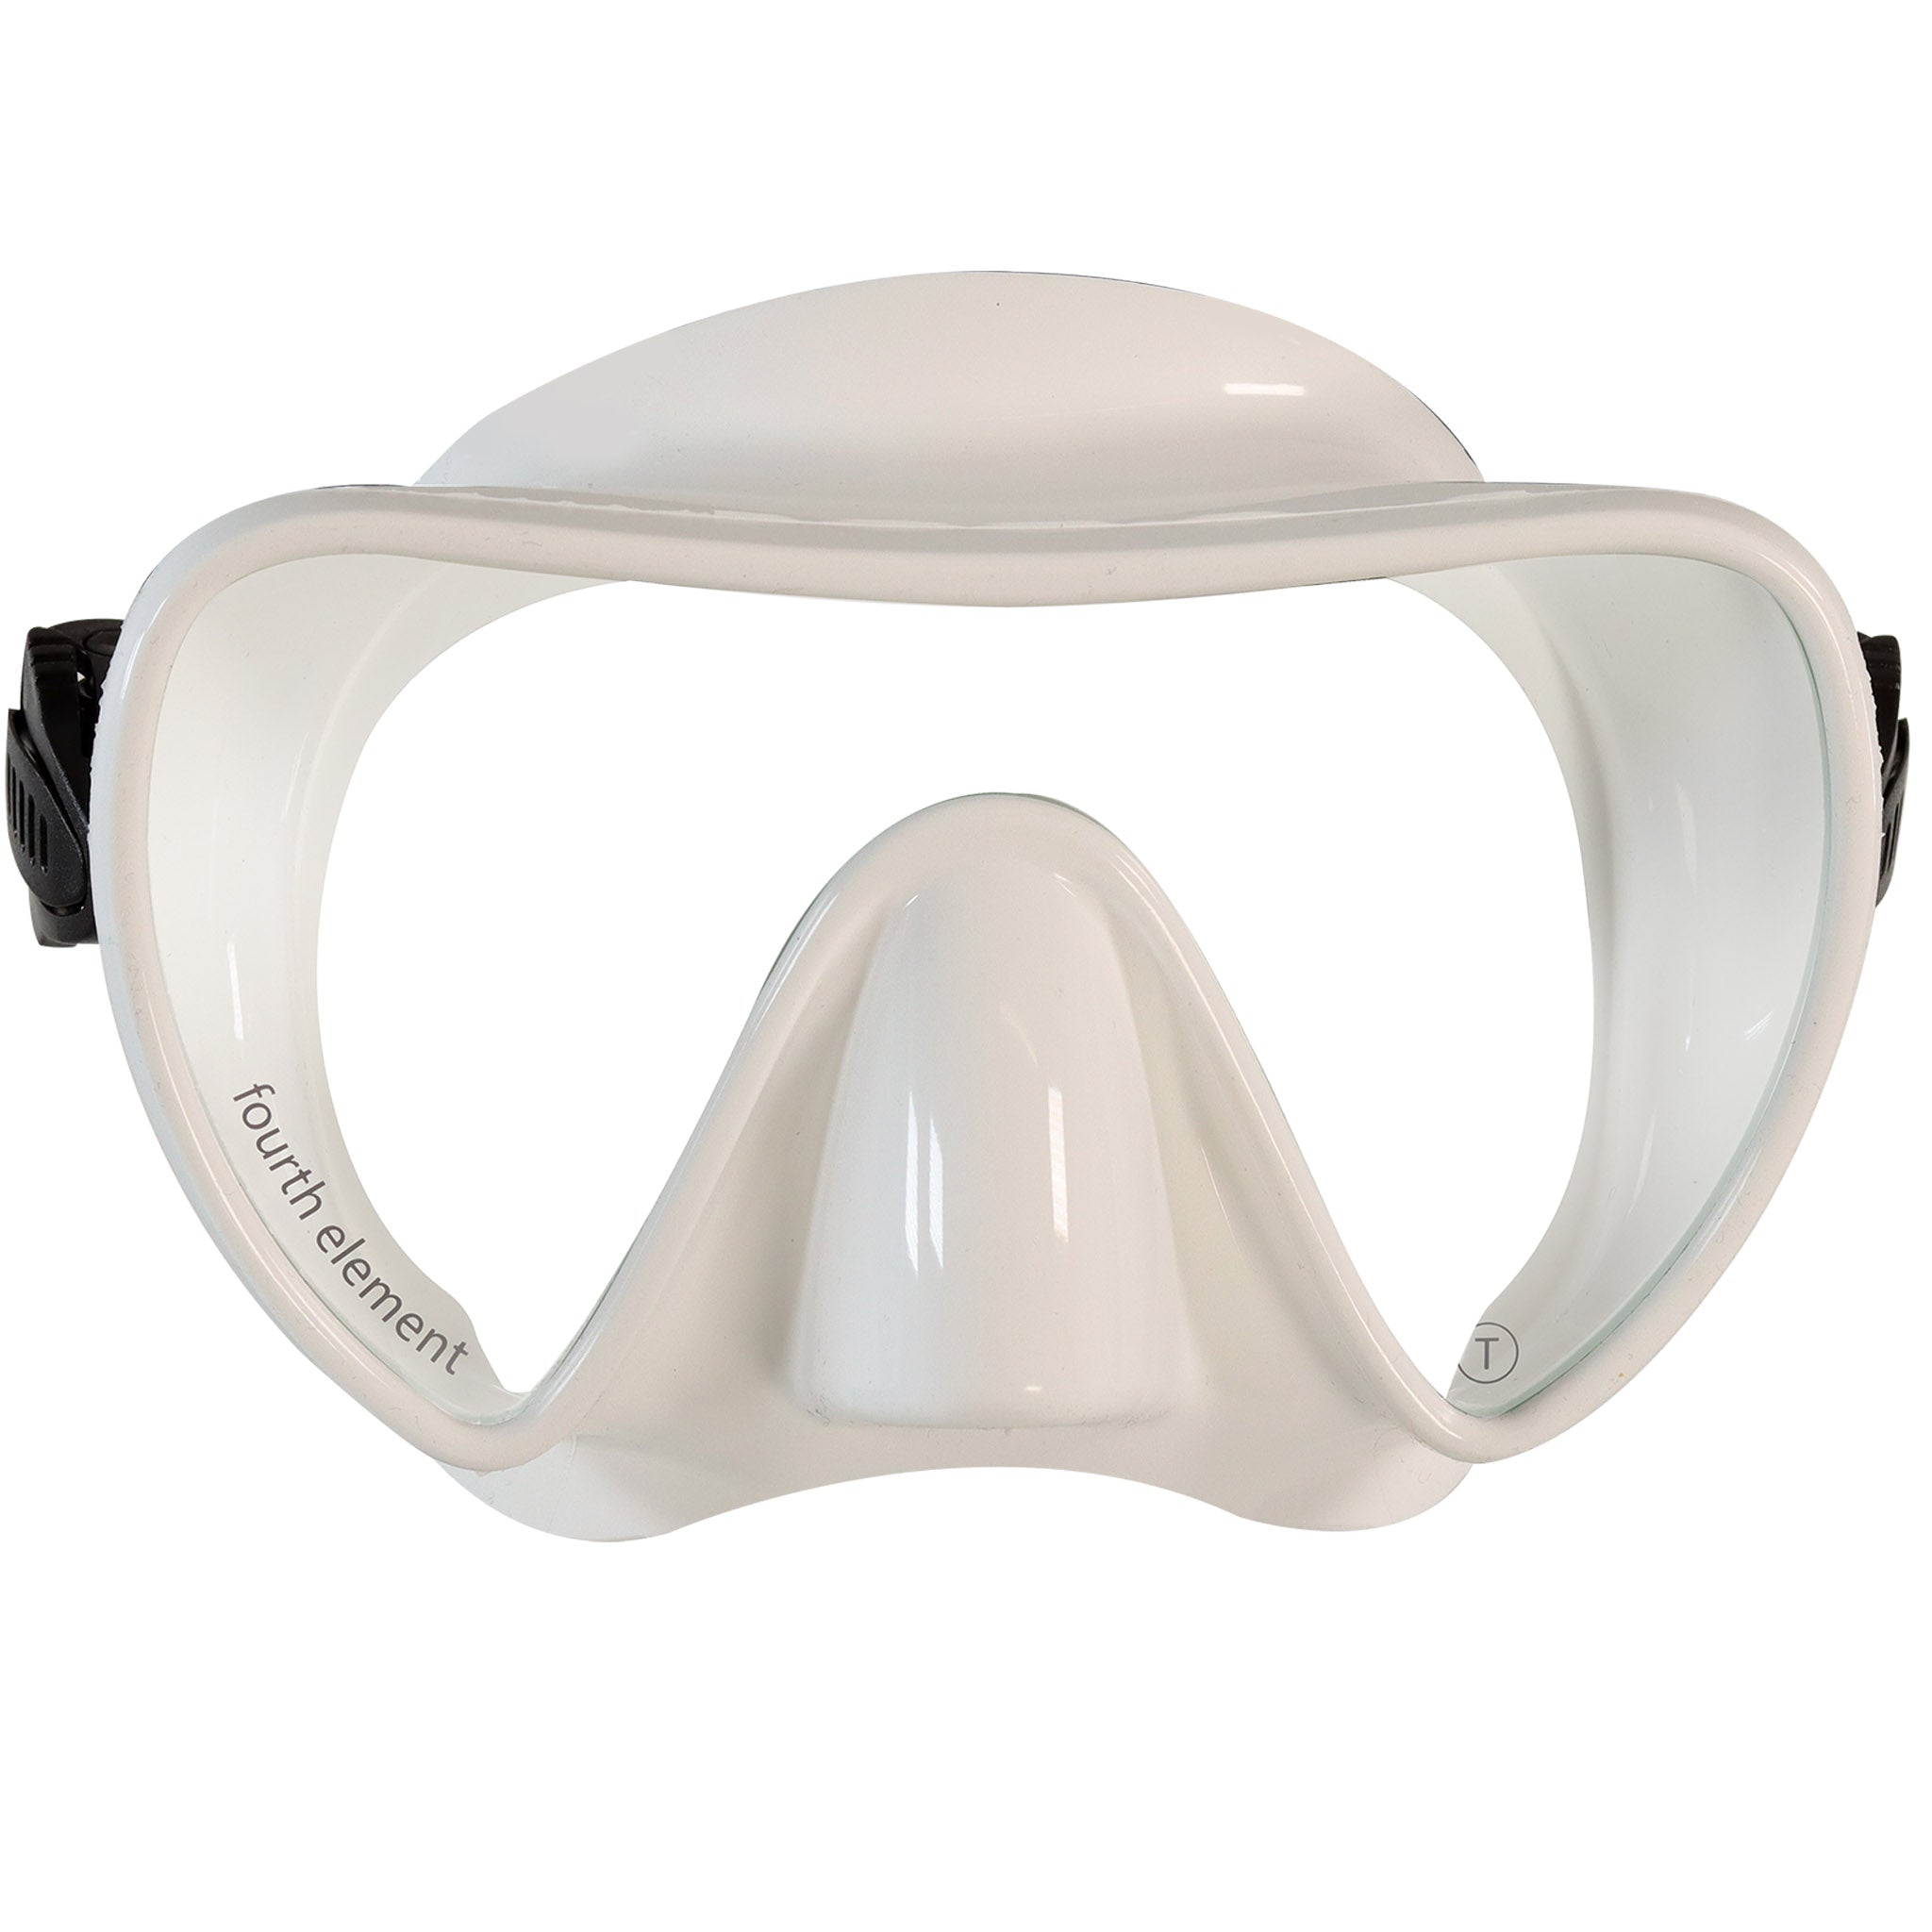 Fourth Element Scout Mask - White | Clarity